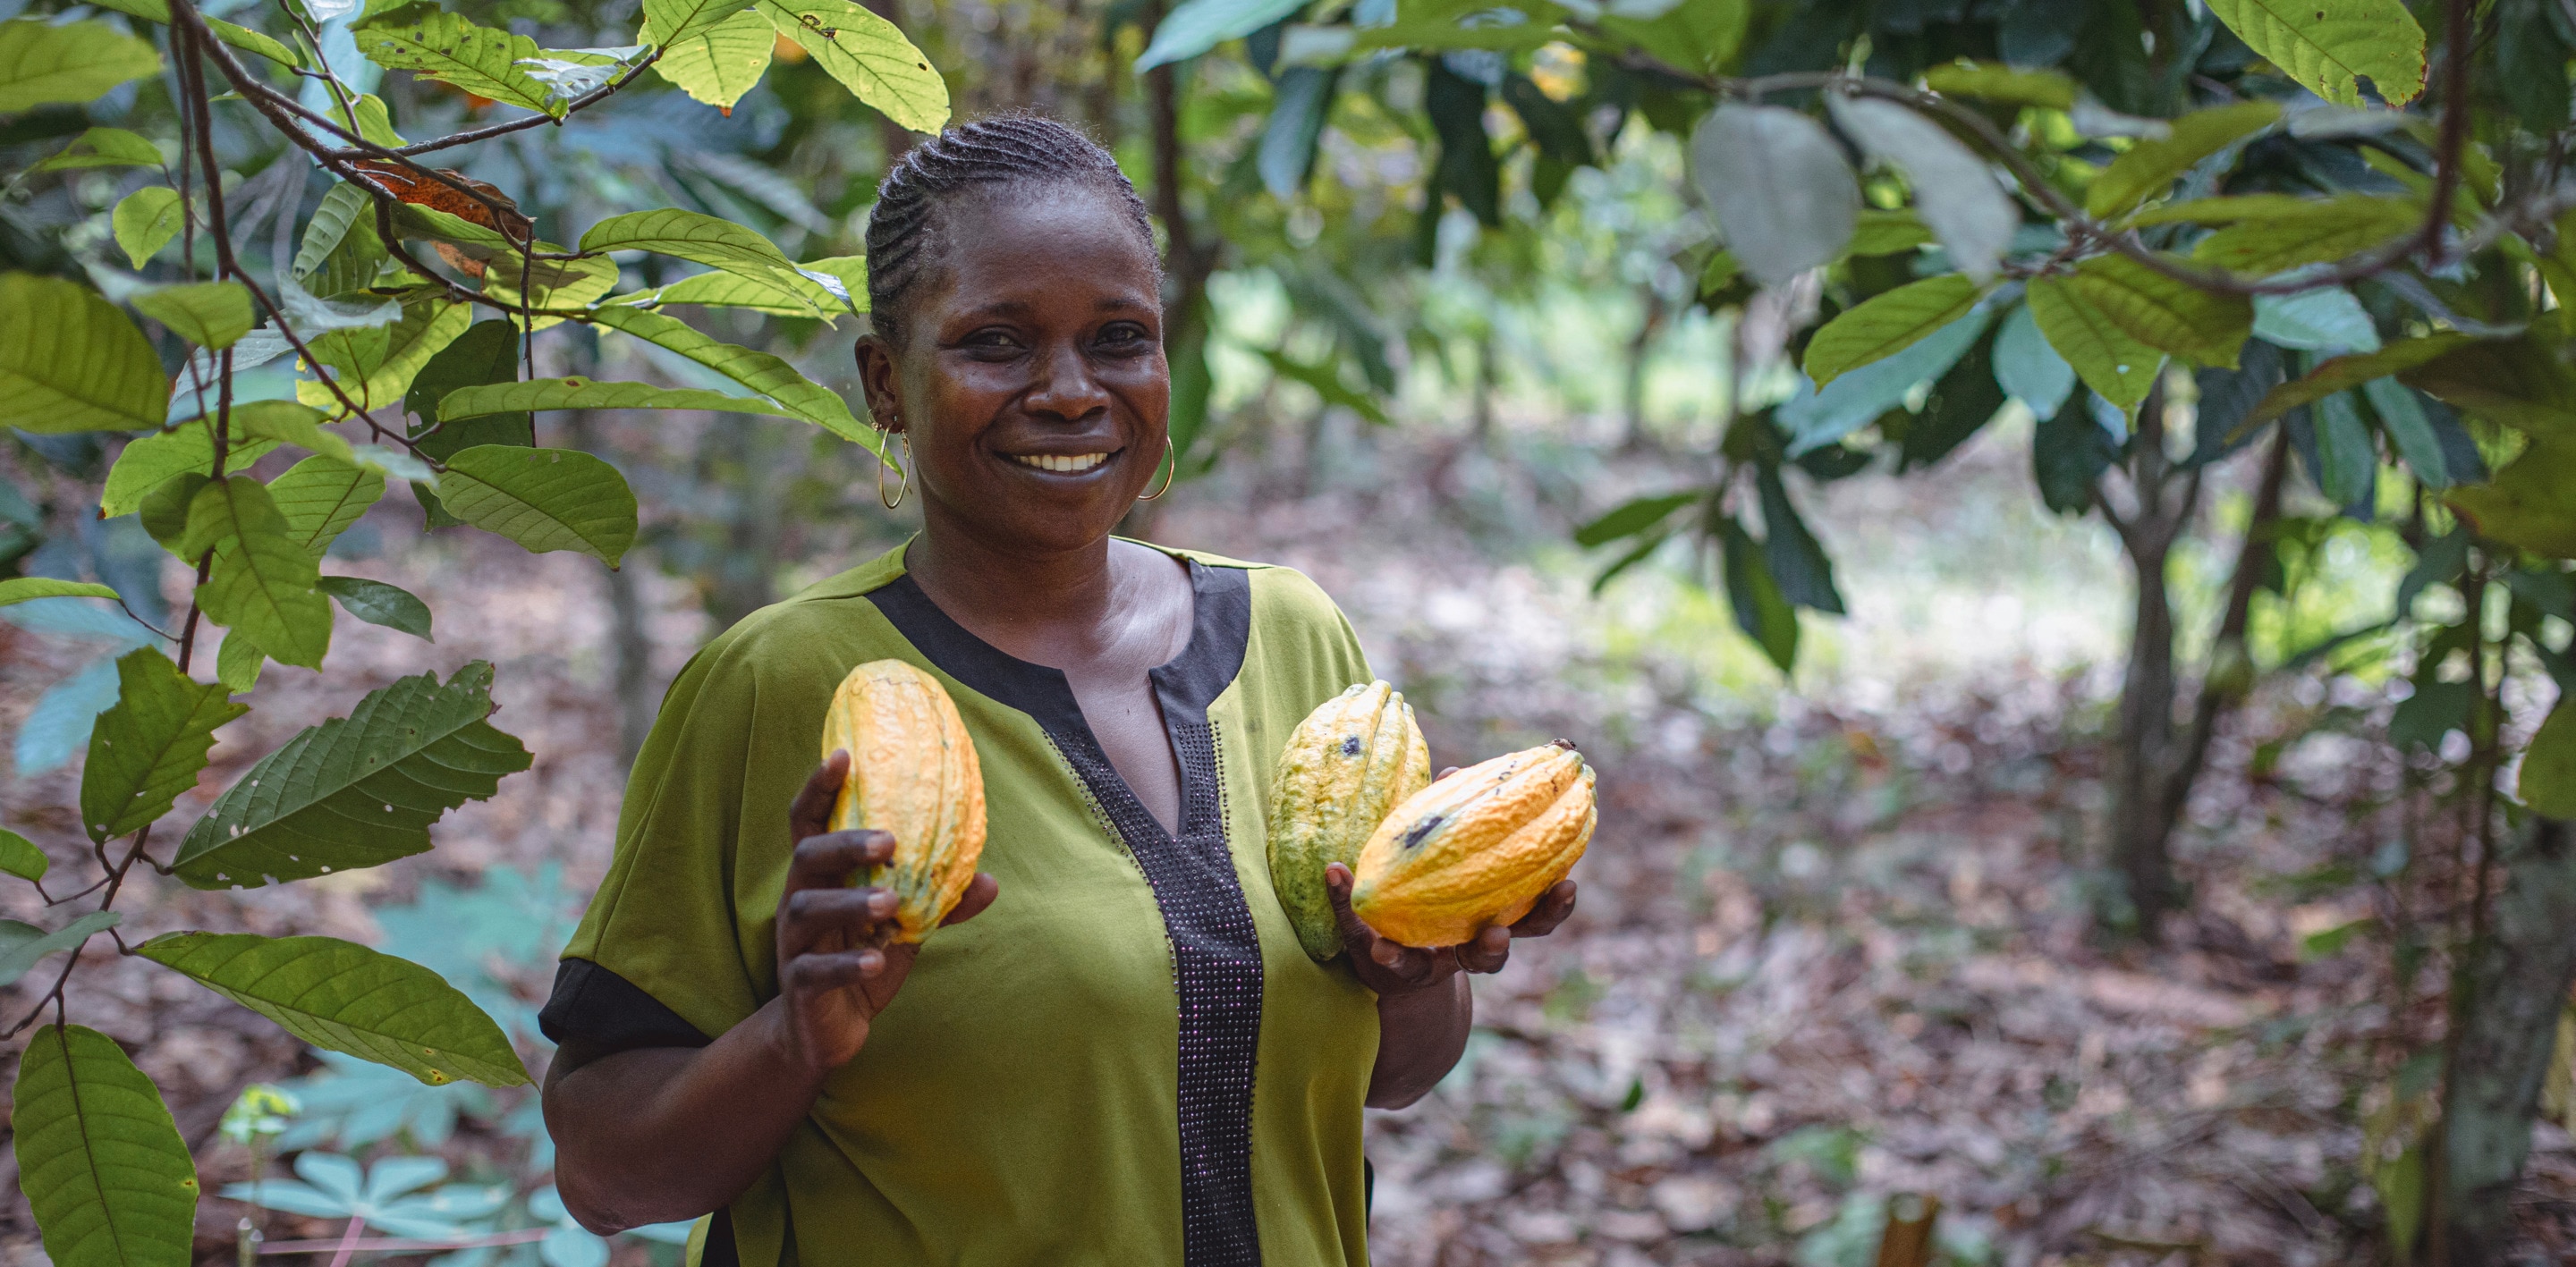 Smiling female cocoa farmer wearing a green top and holding three yellow cocoa pods